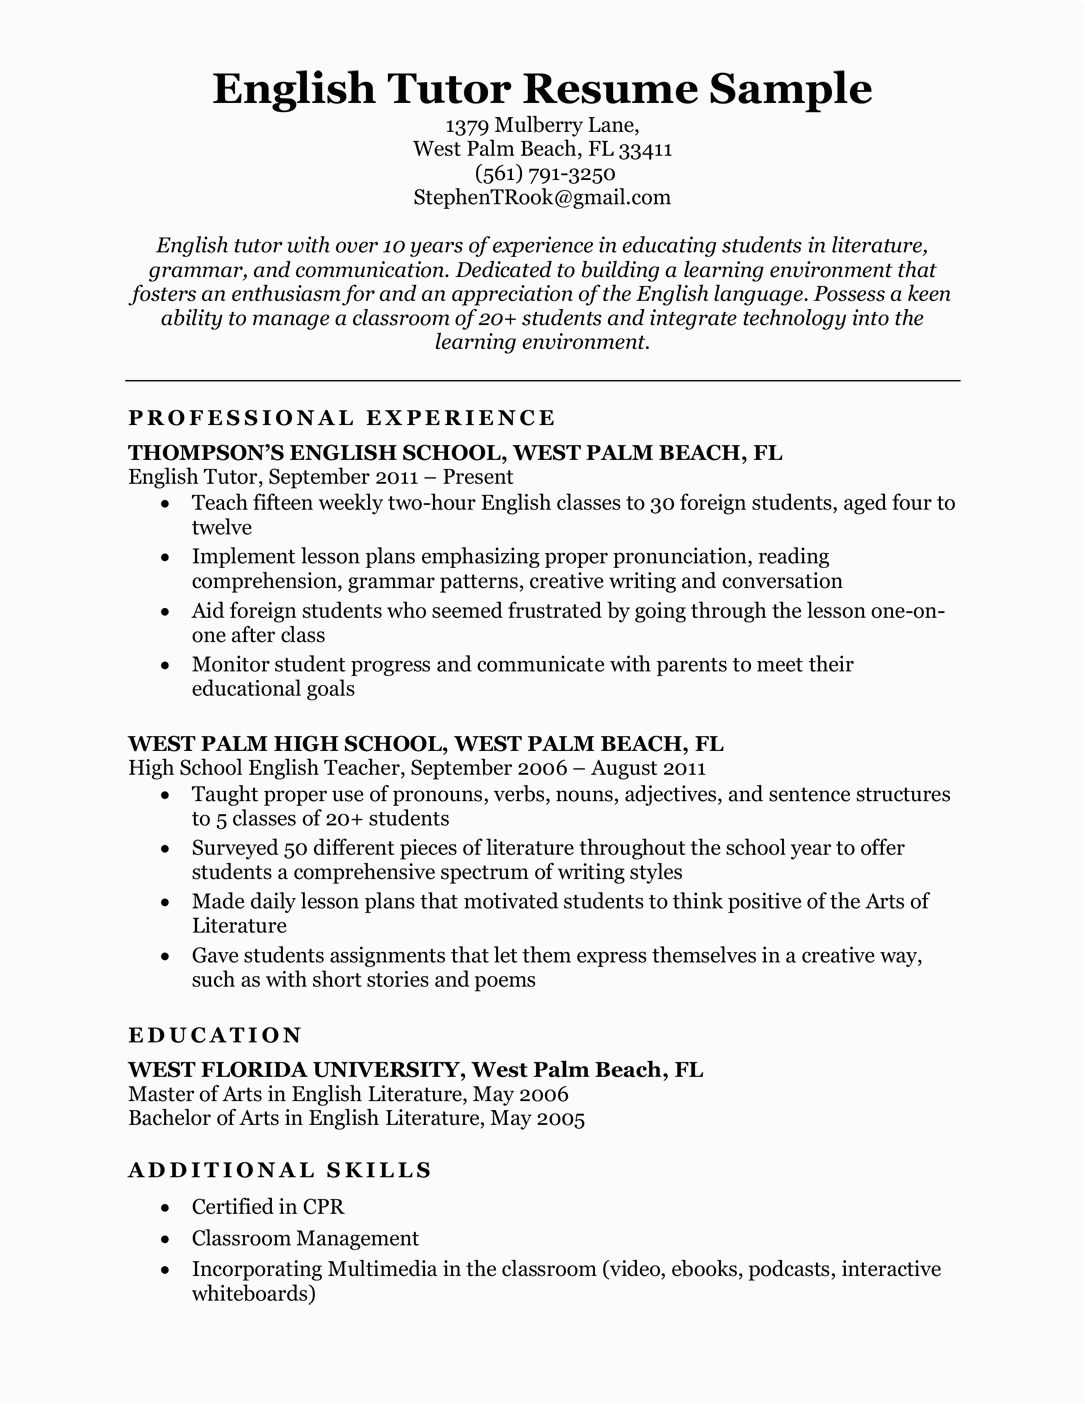 Sample Resume for Online English Tutor without Experience English Tutor Resume Sample